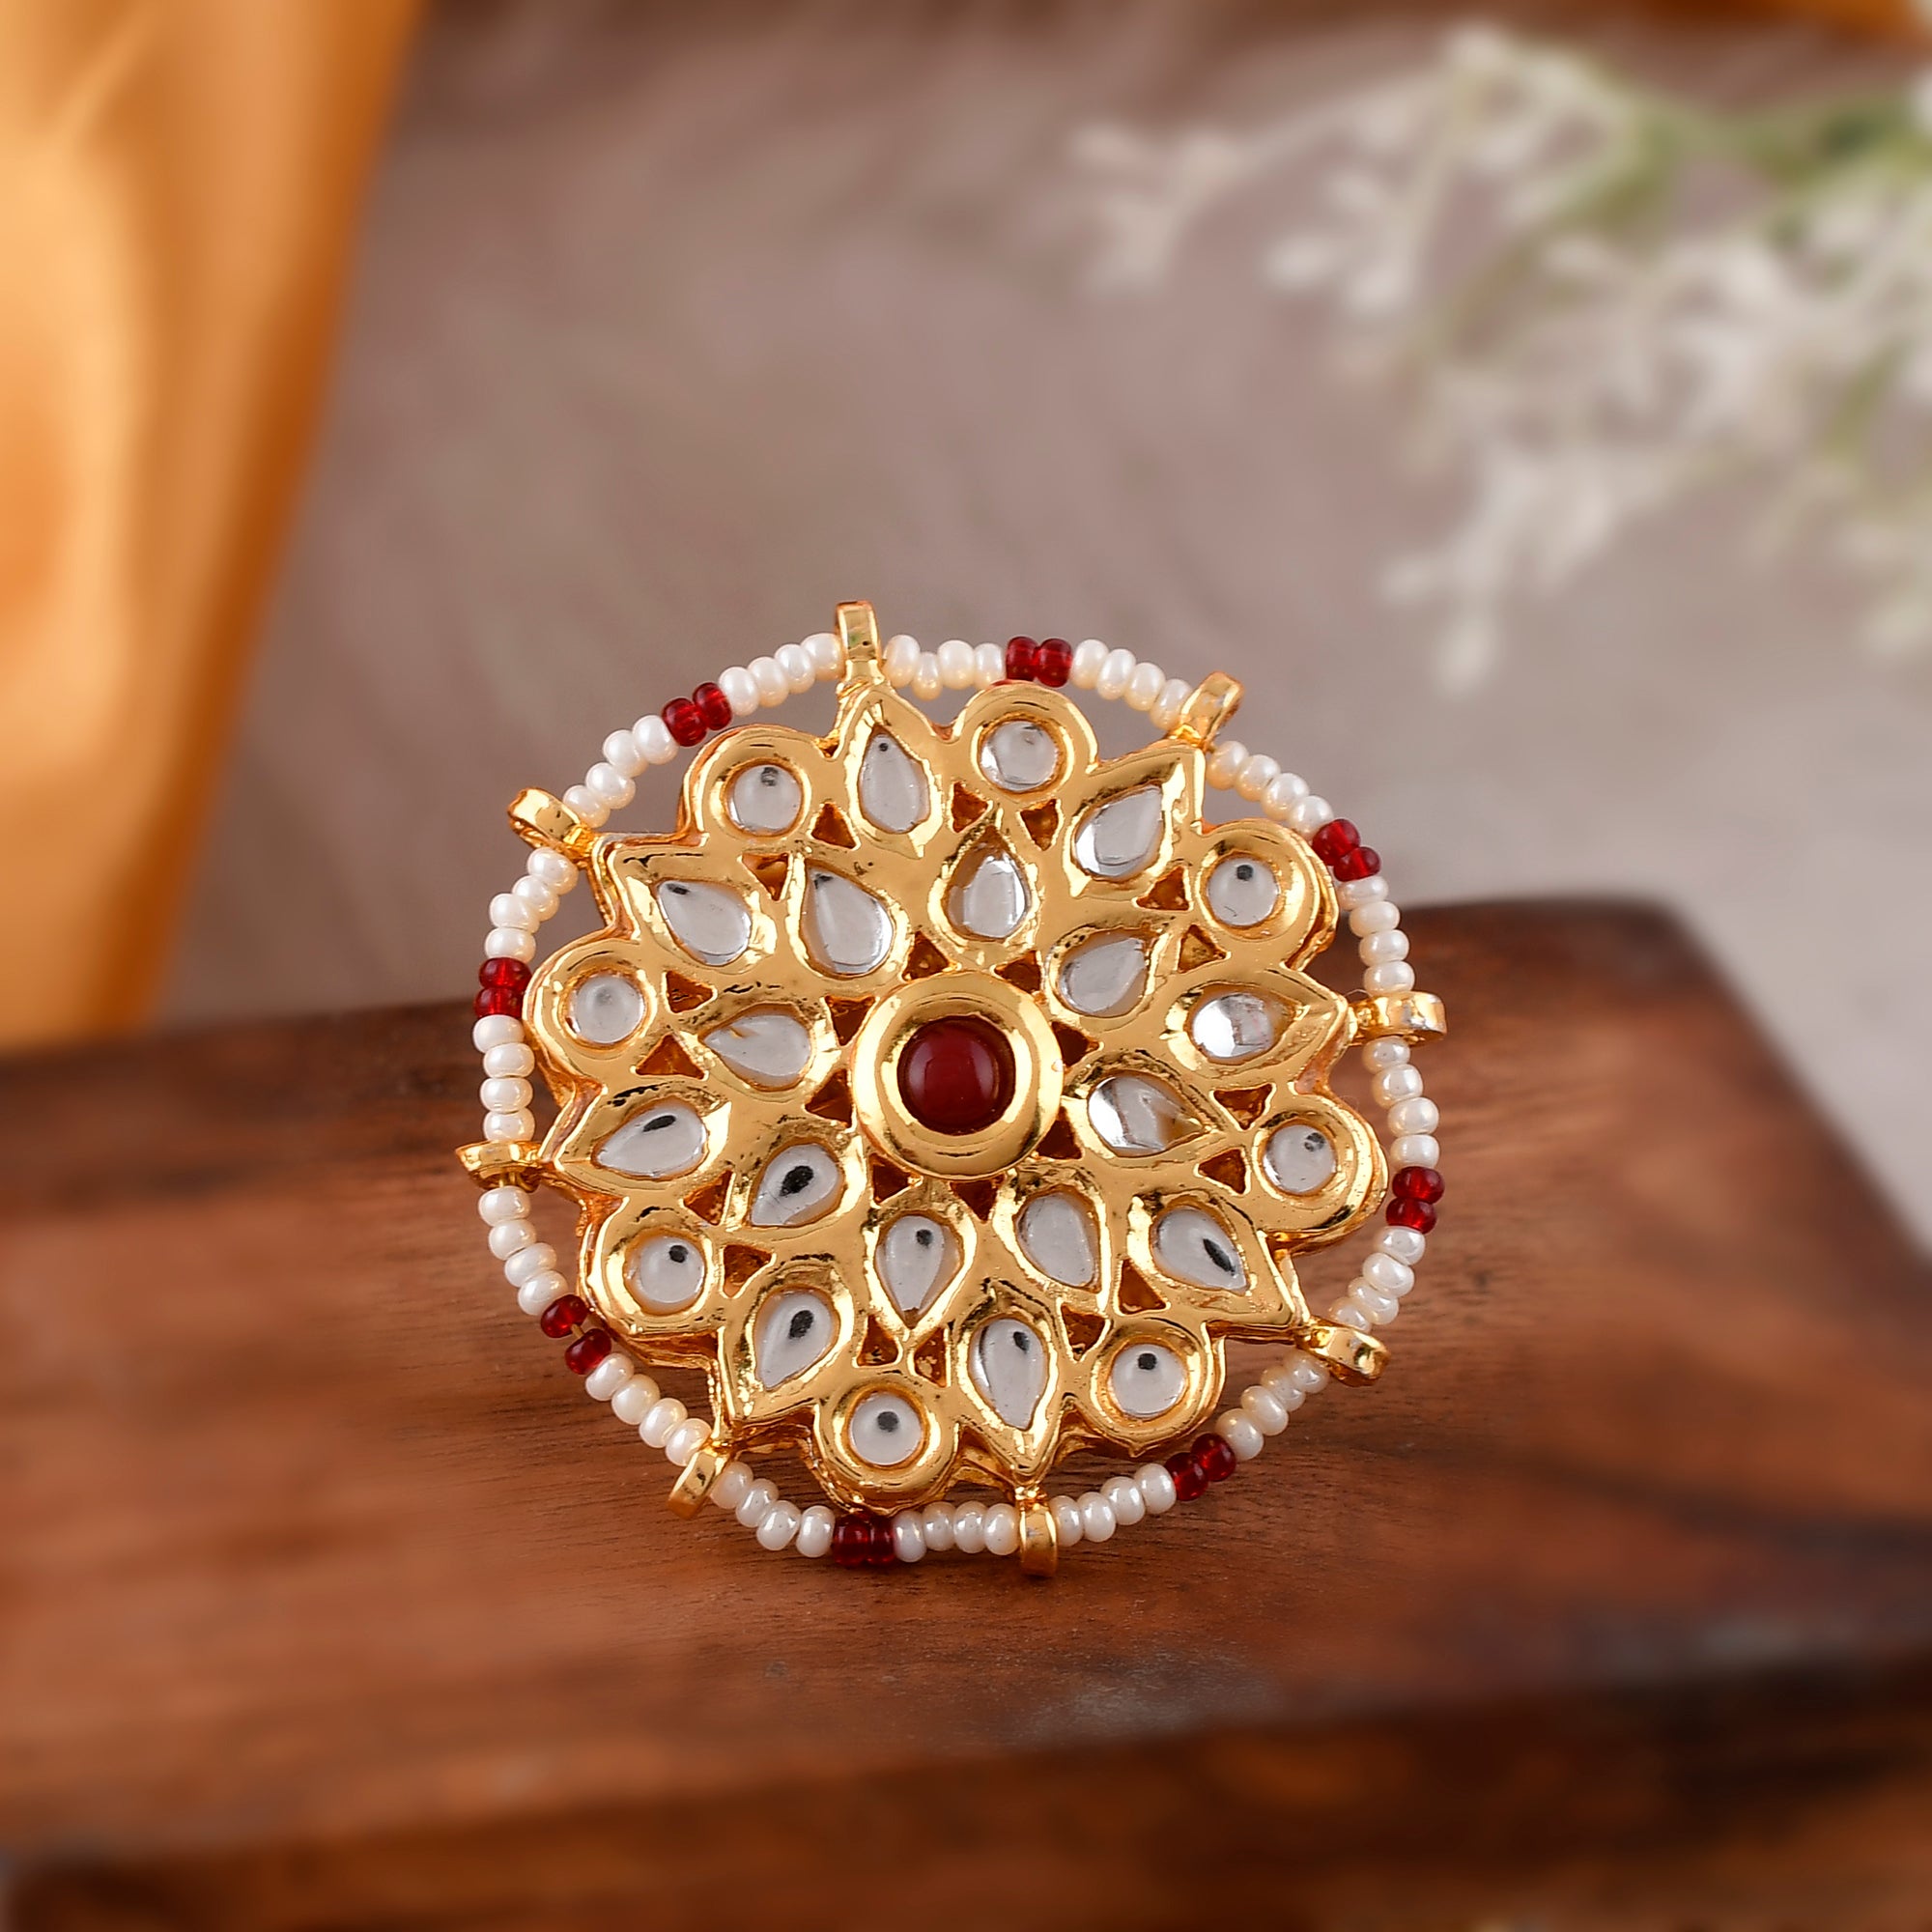 Shop from Kundan Rings Online Jewellery Collection | Rubans Accessories